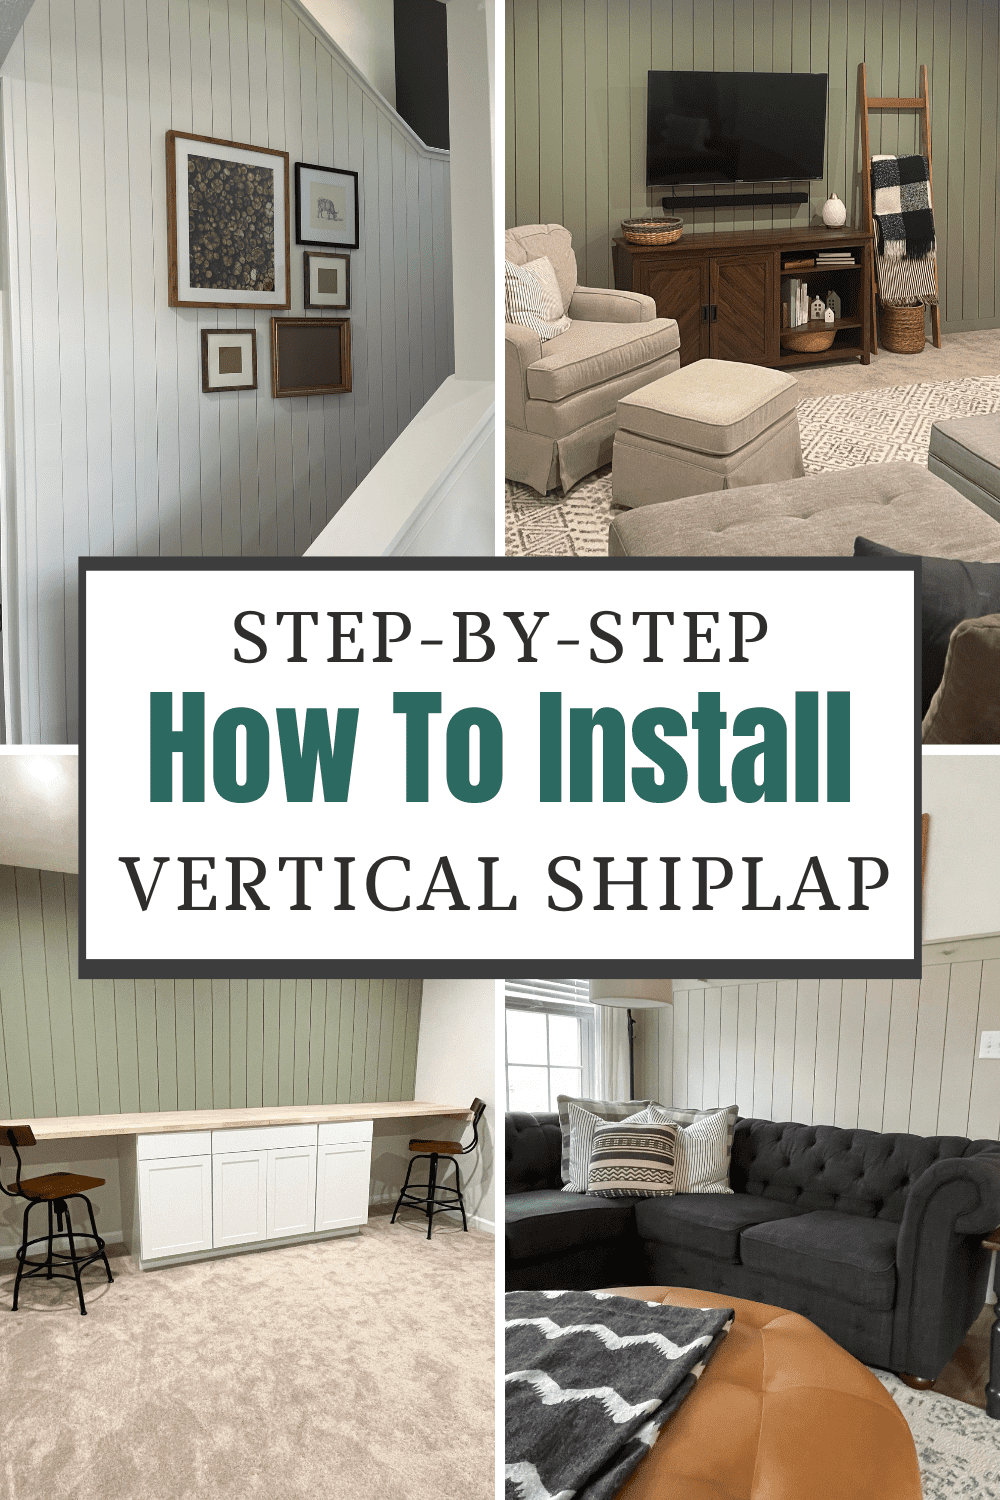 Is It Really That Easy To Install A Vertical Shiplap Wall?- Step-By-Step Guide